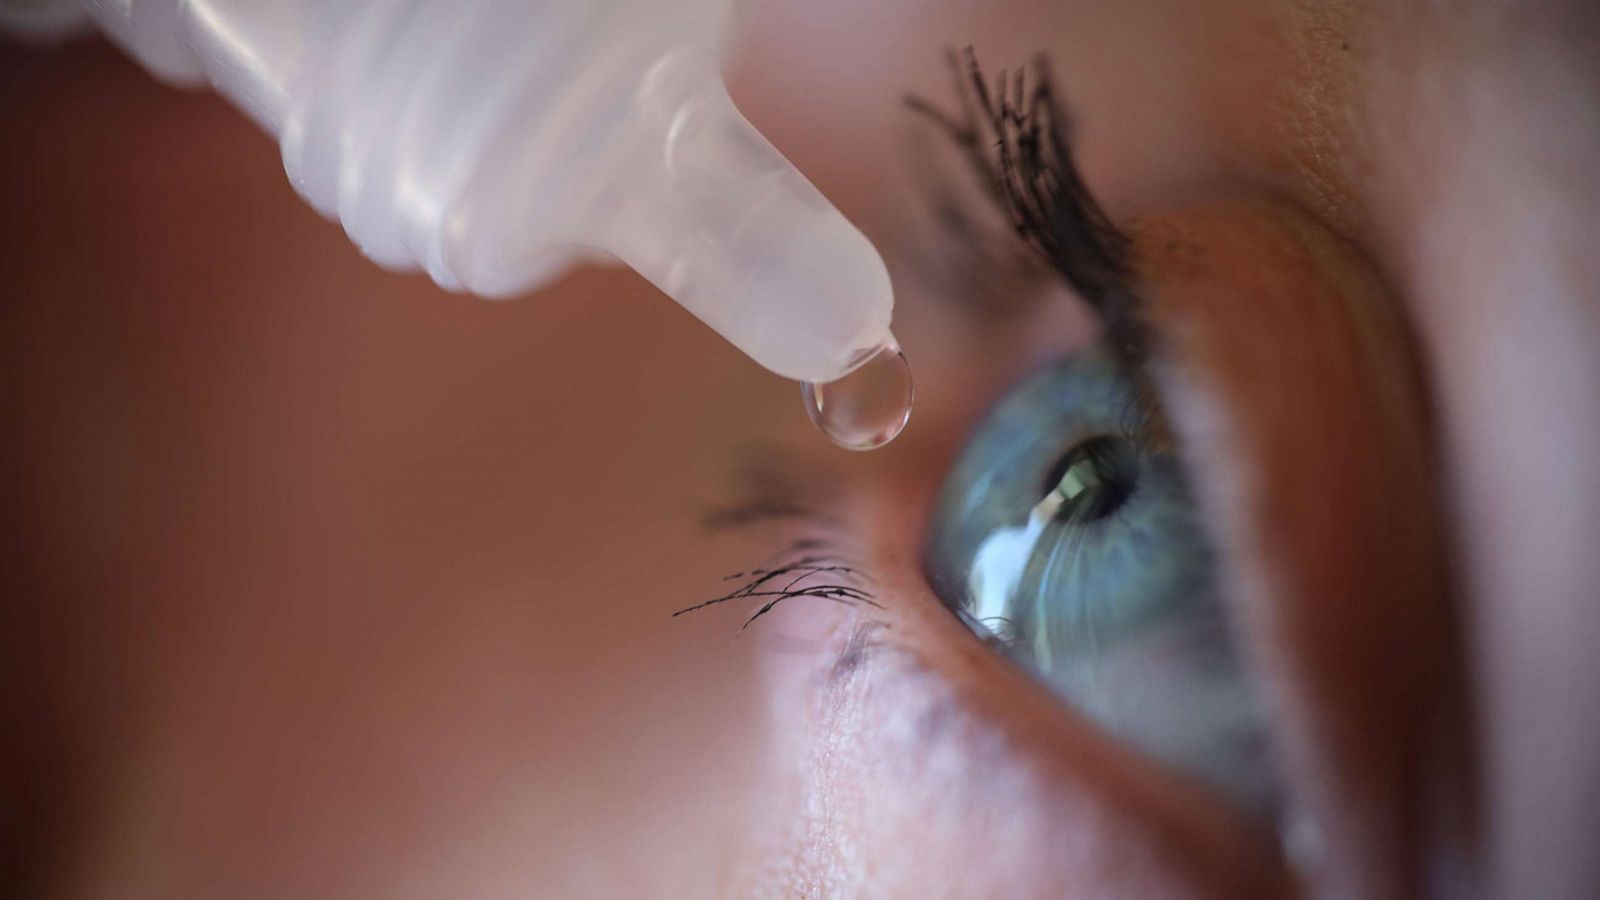 Certain eye drops should be thrown out due to bacterial and fungal  contamination, FDA warns - ABC News